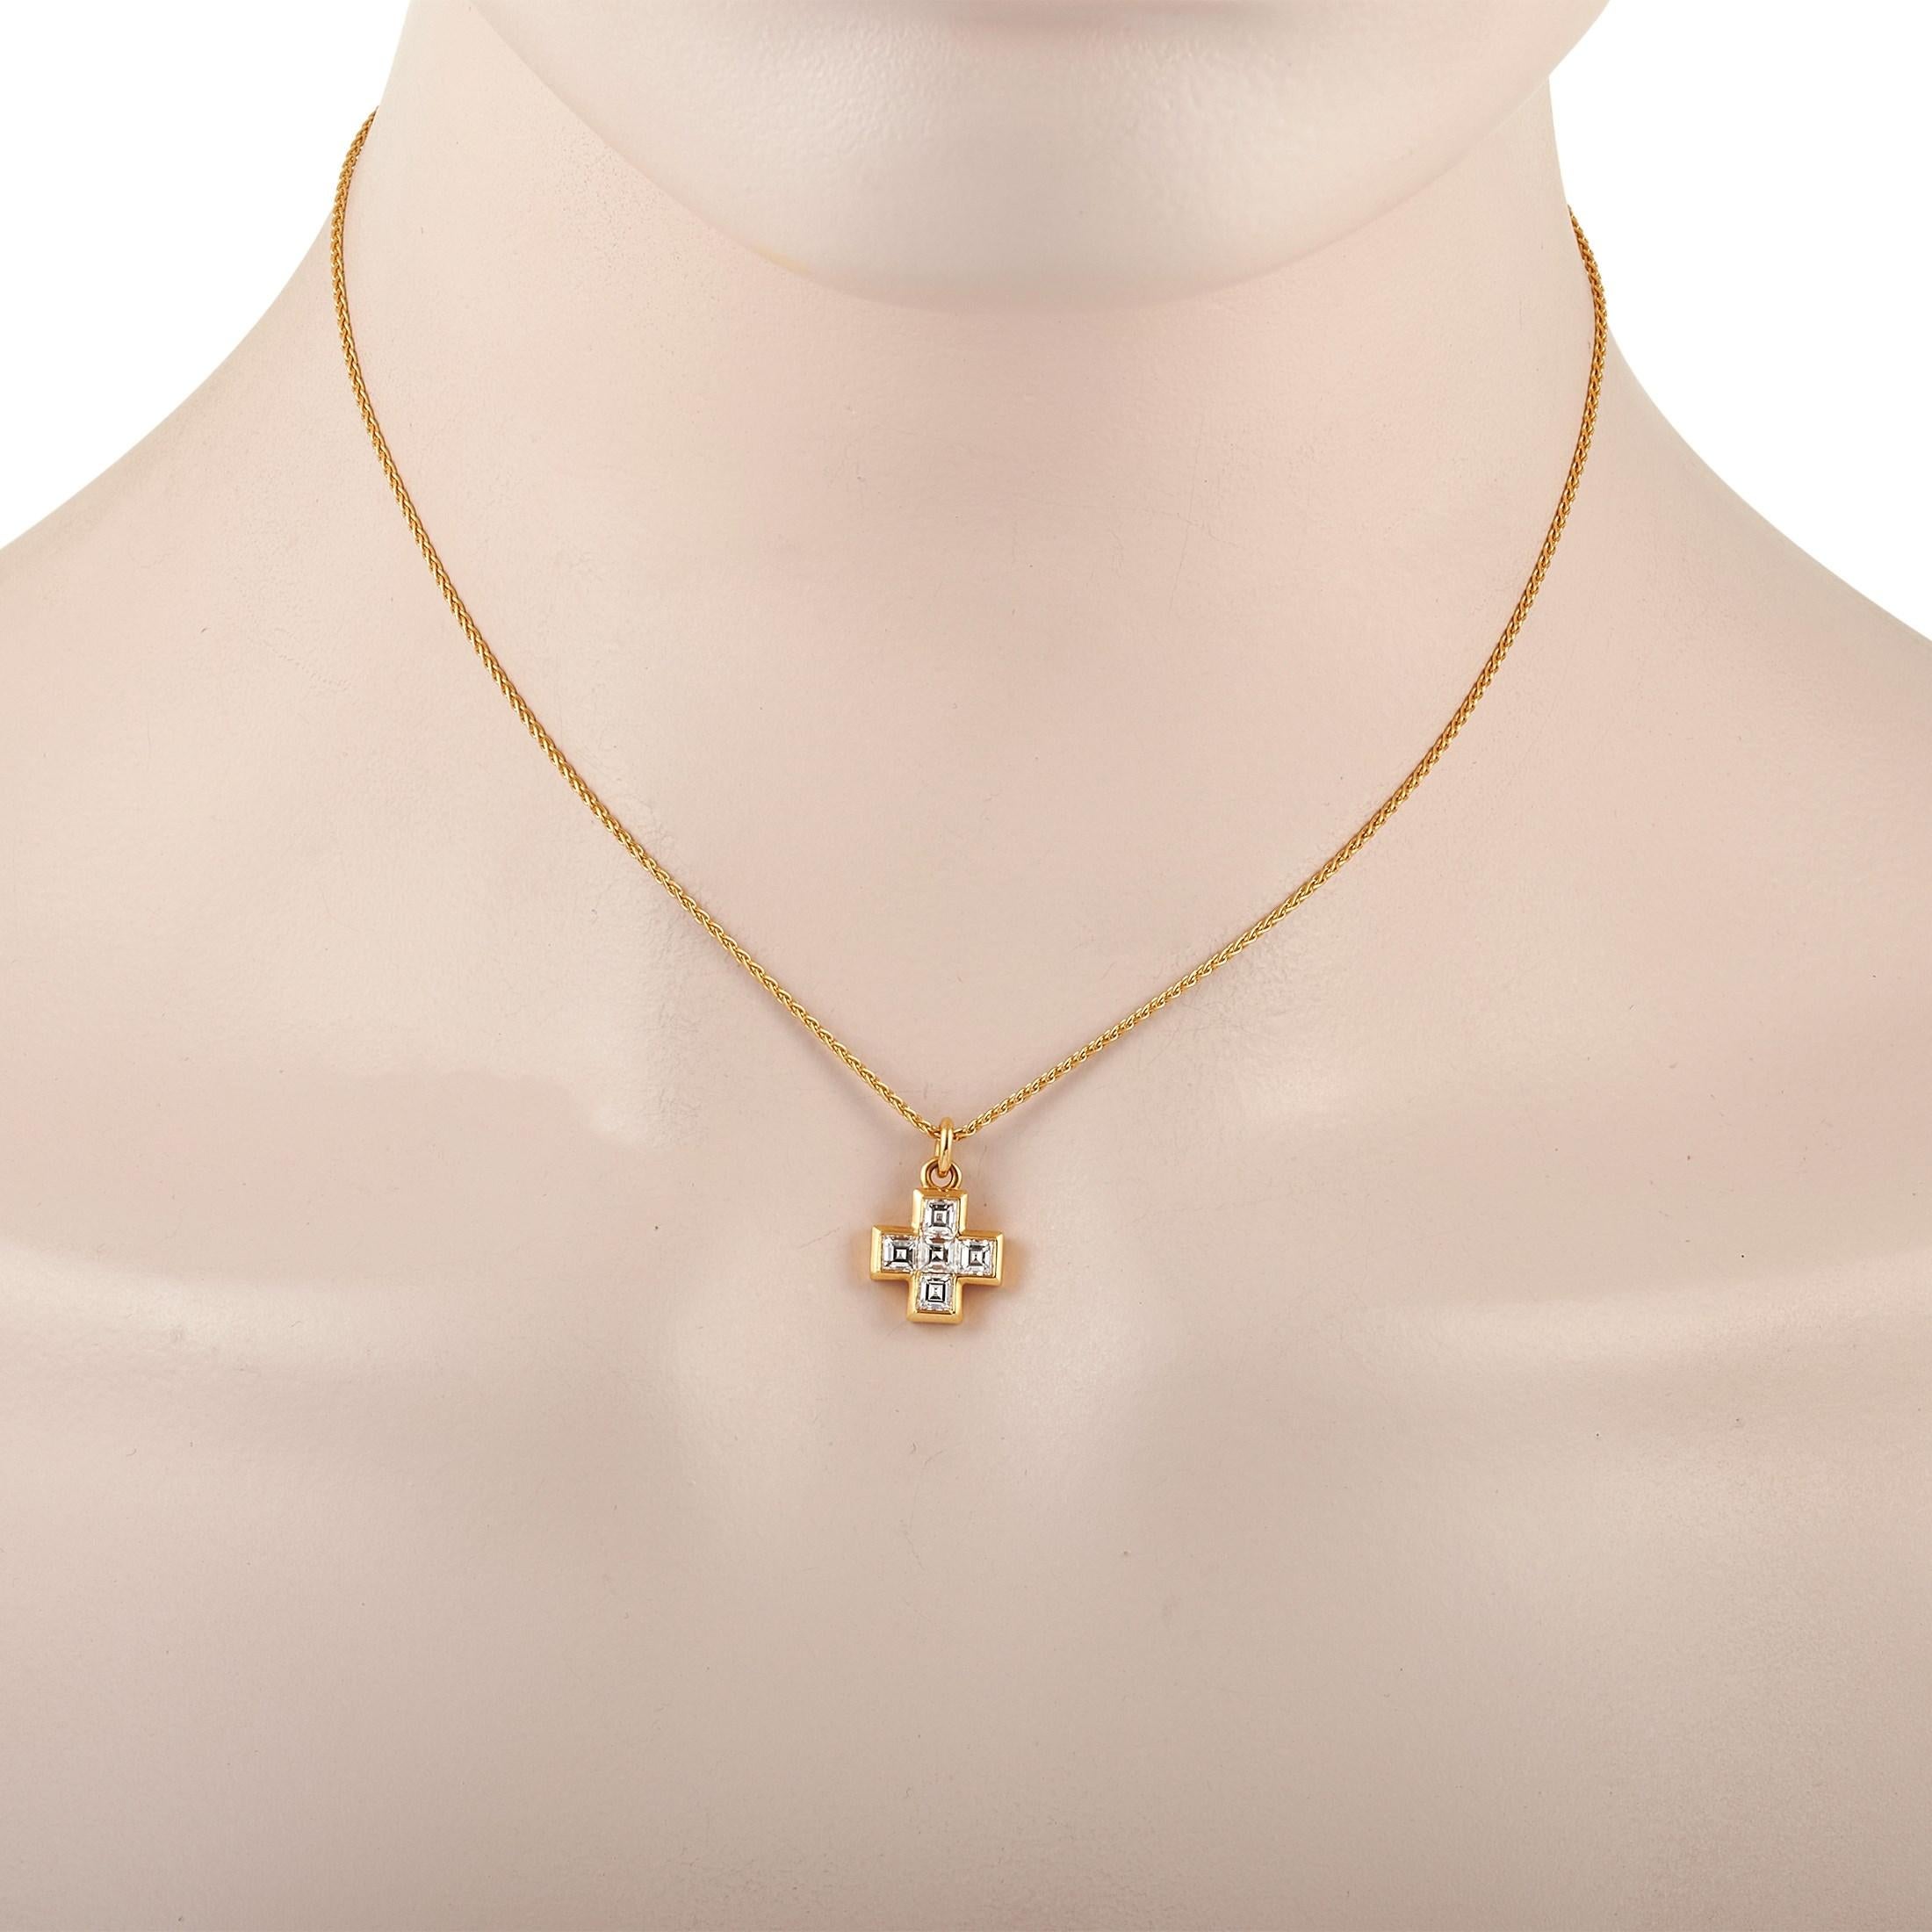 This BvlgariI necklace is simply amazing. The necklace is crafted from 18K yellow gold. It has a gold cross pendant set with a 1.00 carat sparkling princess cut diamonds that feature E color and VVS clarity. This necklace weighs 5.4 grams with a